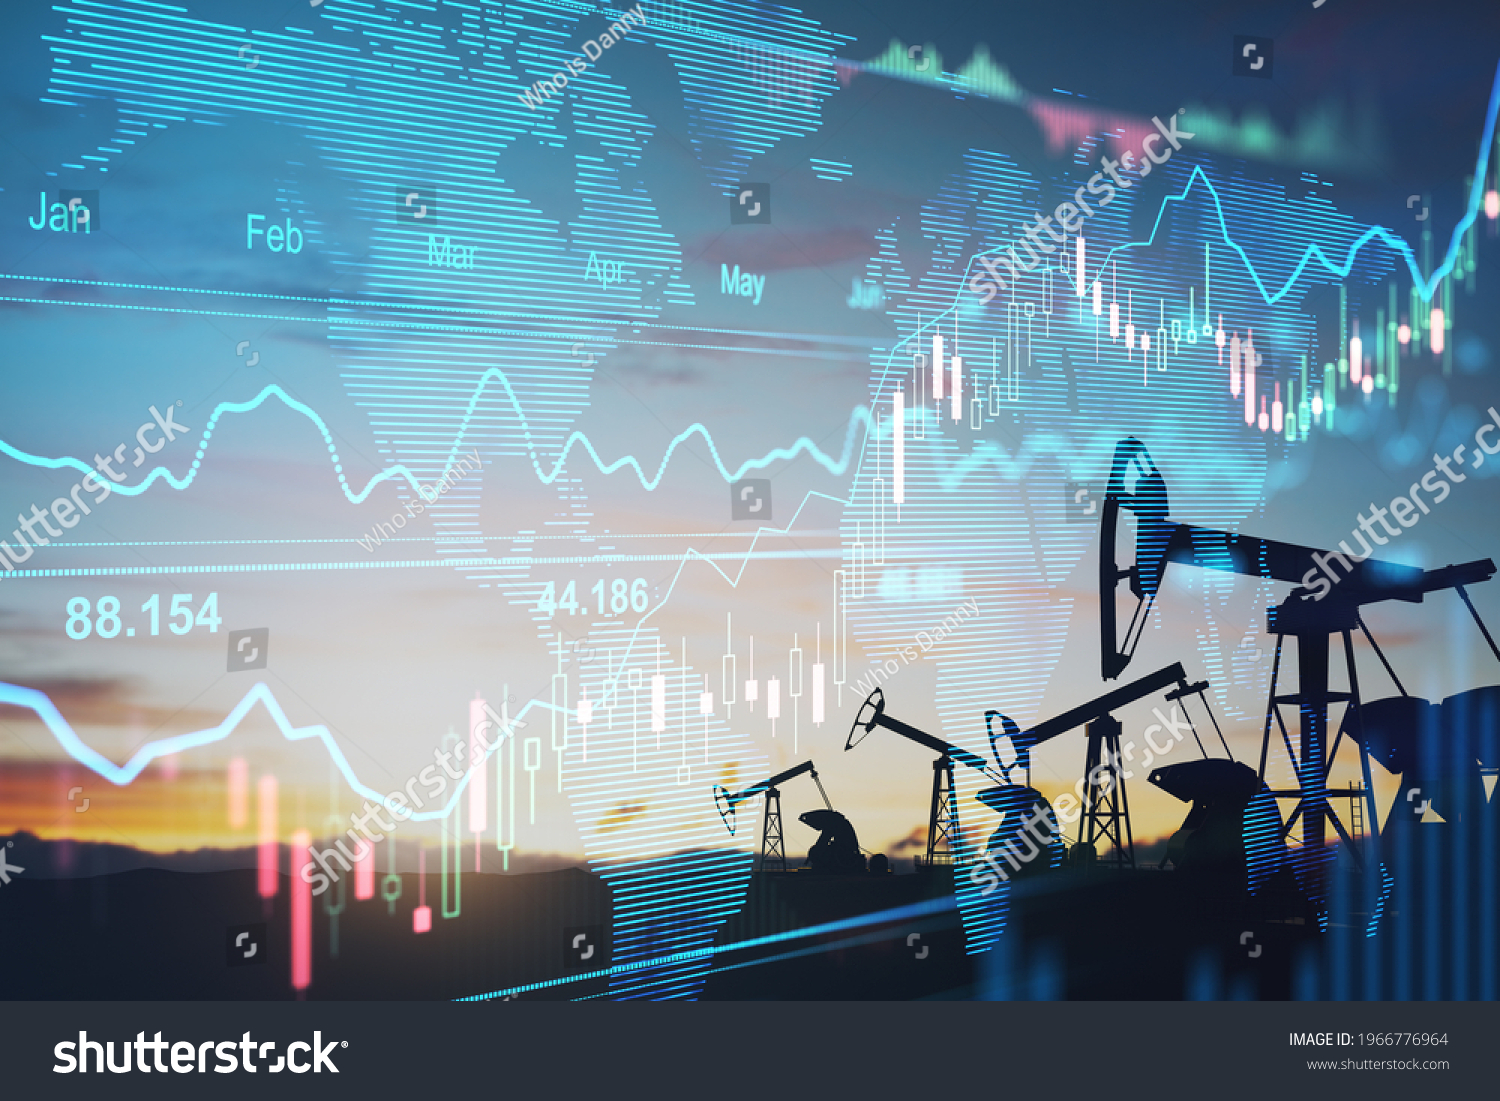 Rise in gasoline prices concept with double exposure of digital screen with financial chart graphs and oil pumps on a field #1966776964